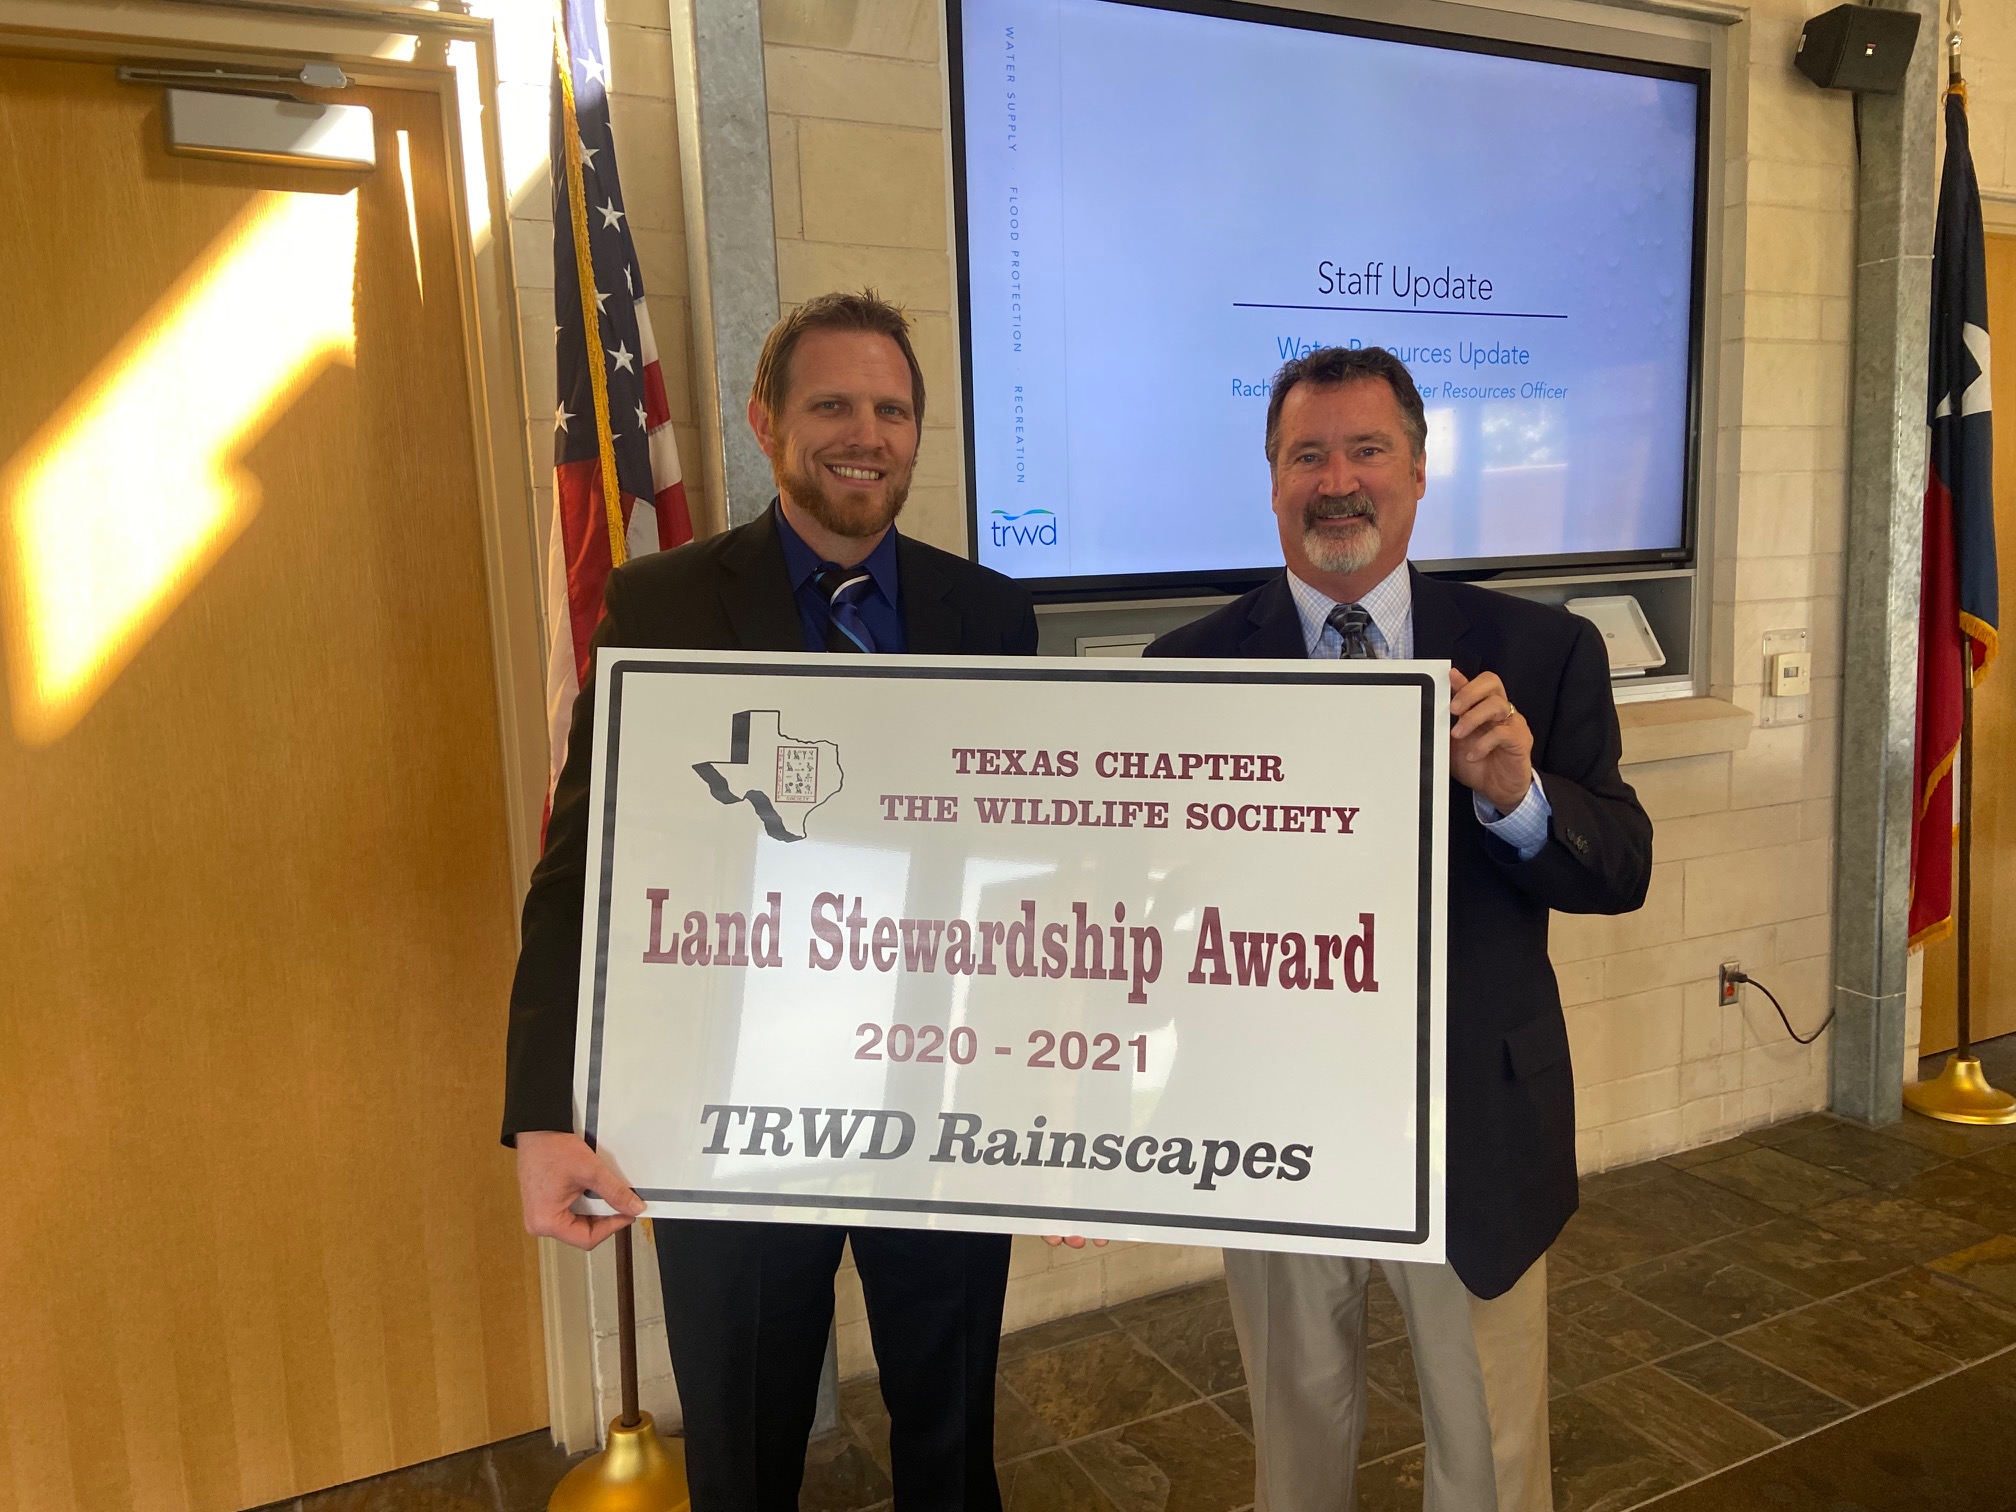 TRWD Rainscapes earn top honor for land stewardship